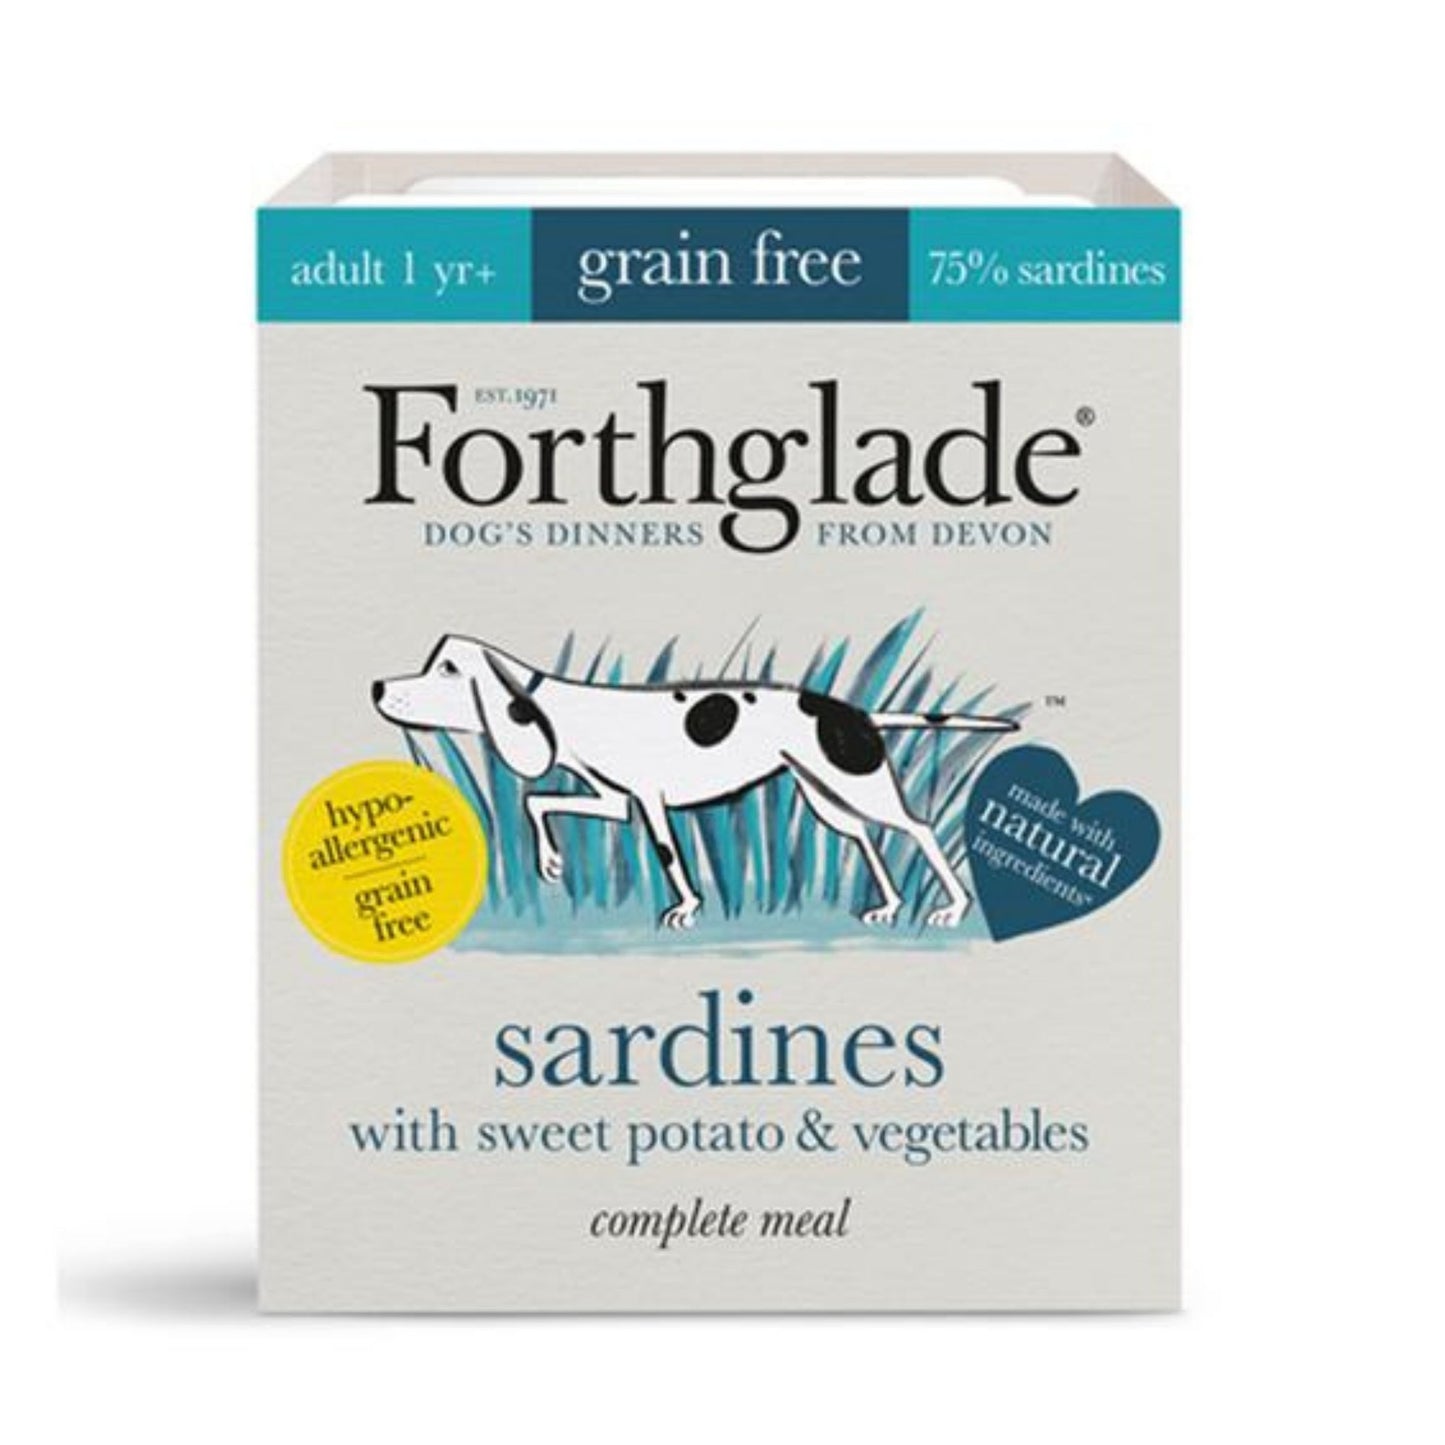 Forthglade Sardines with sweet potato and veg, complete adult food, grain free. 